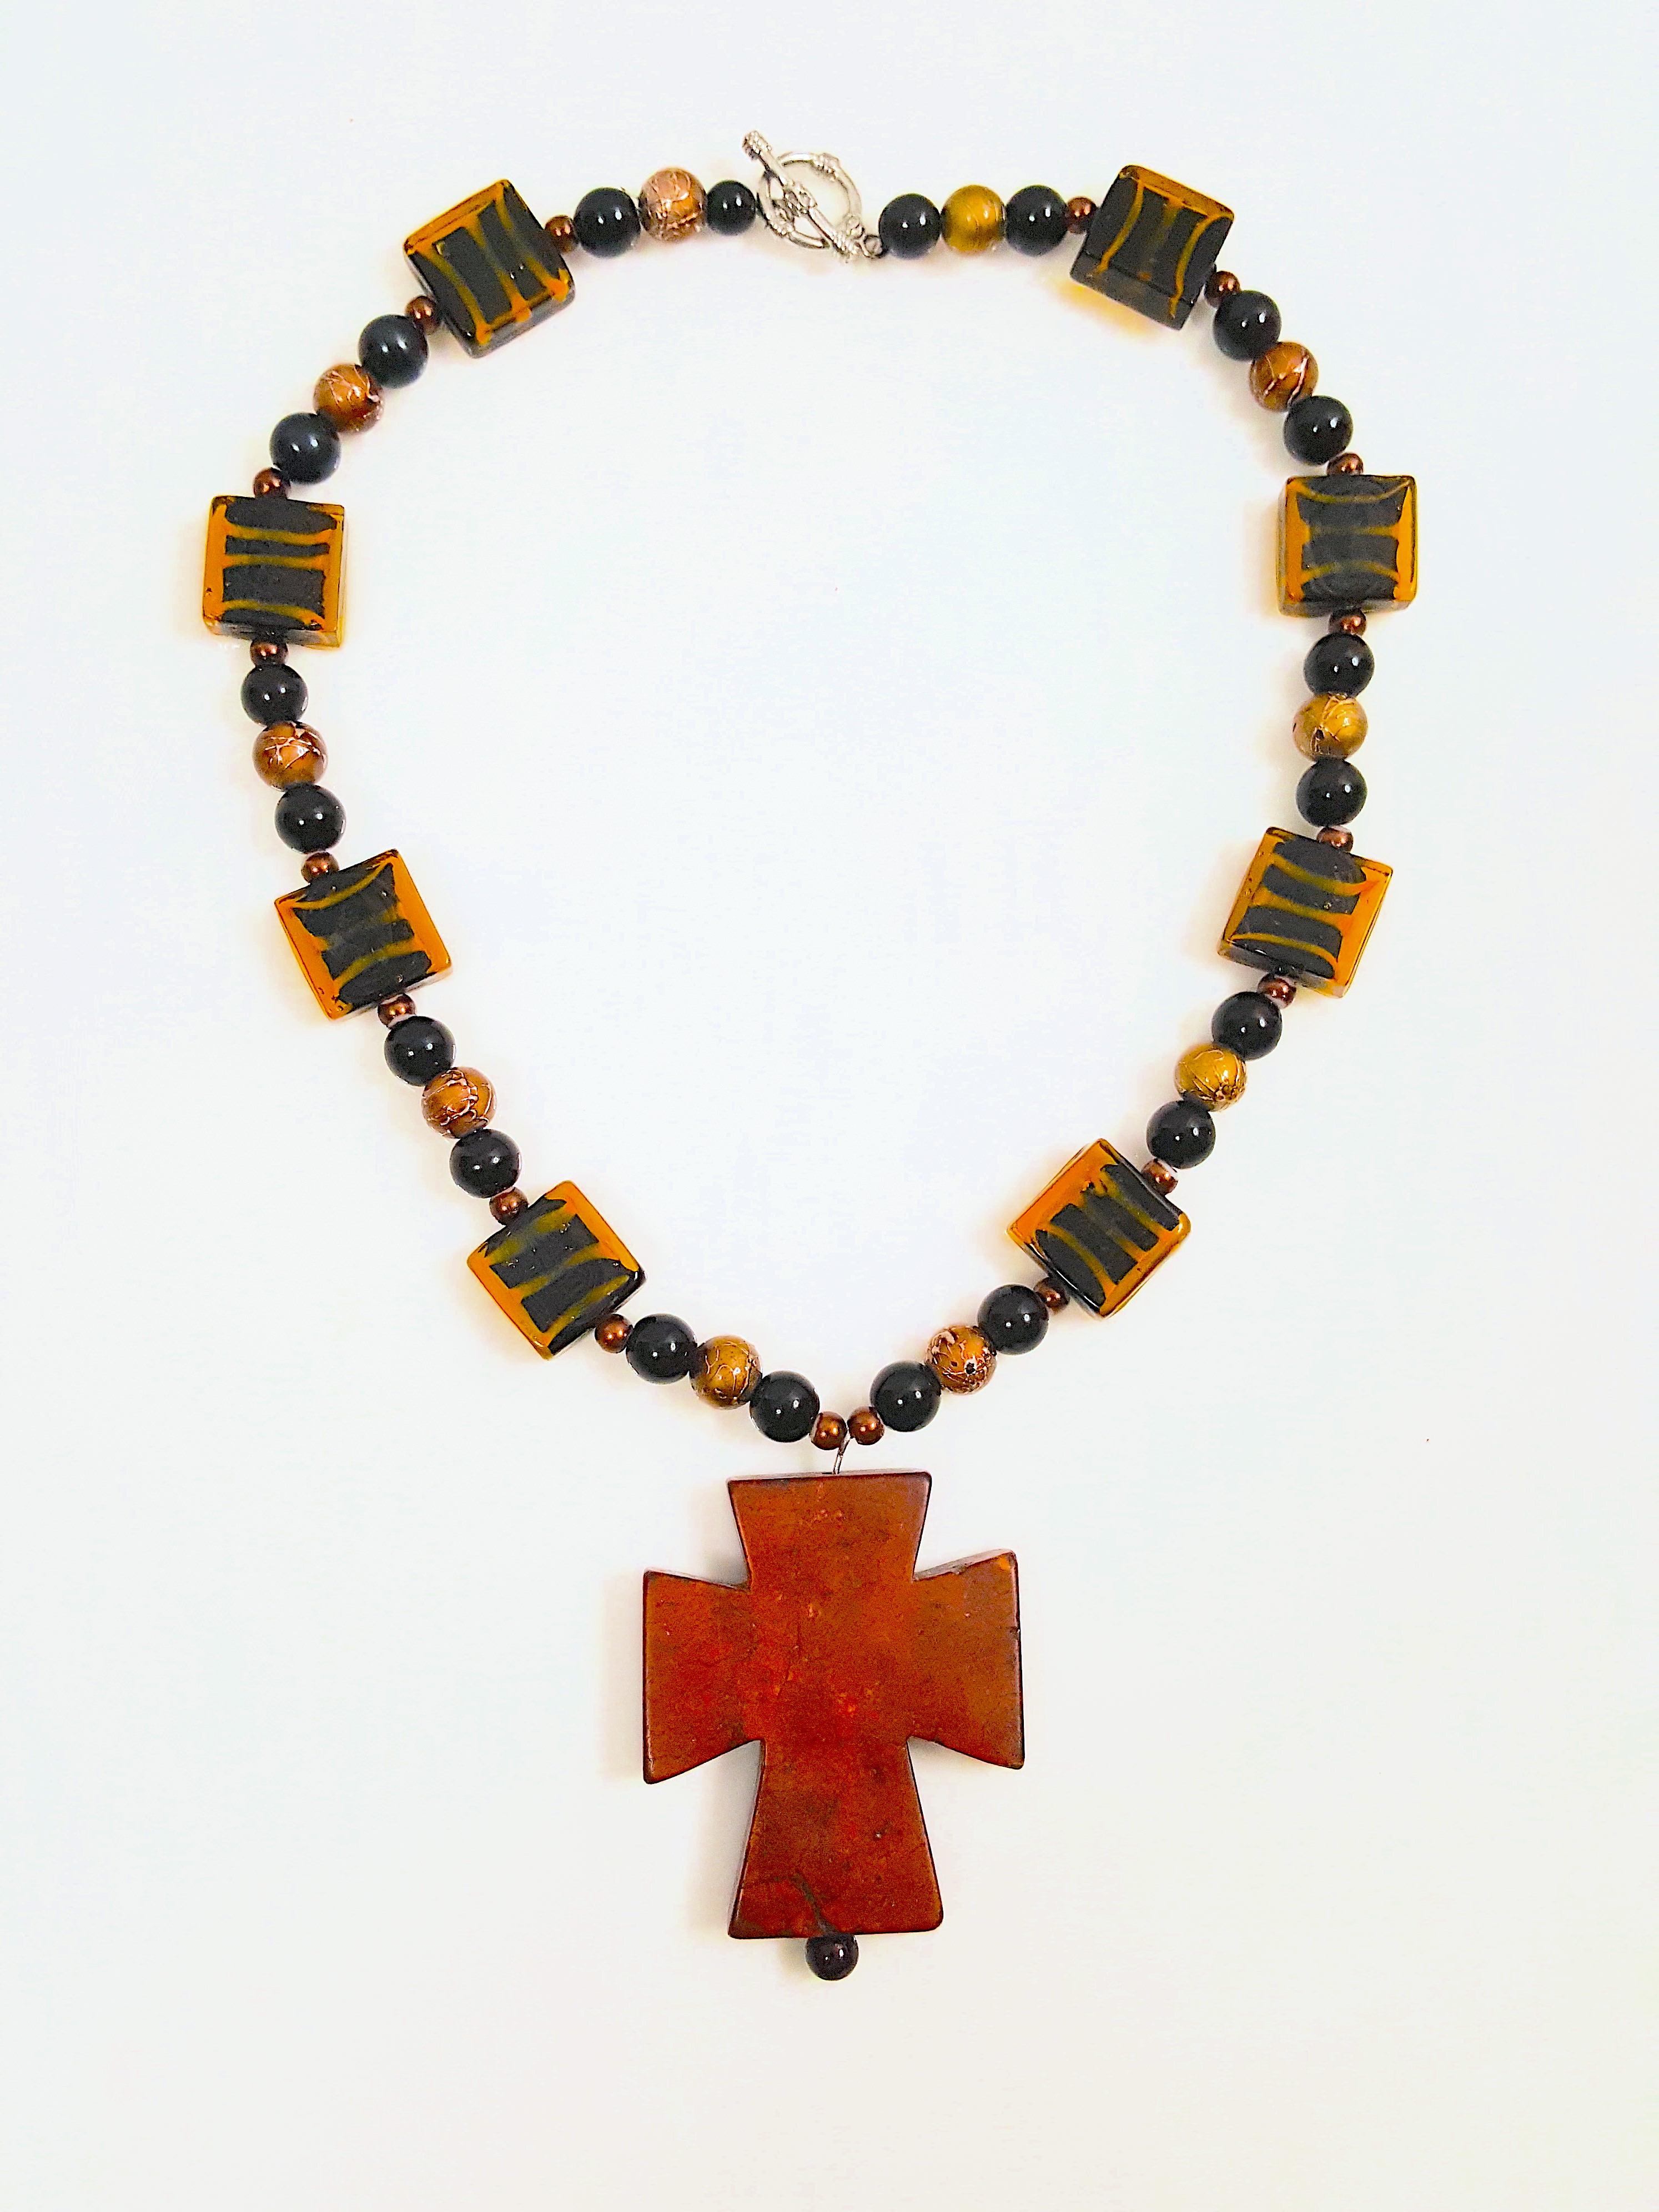 Characteristic of the large chunky shapes including Byzantine-style crosses favored by French couturiers Gabriel 